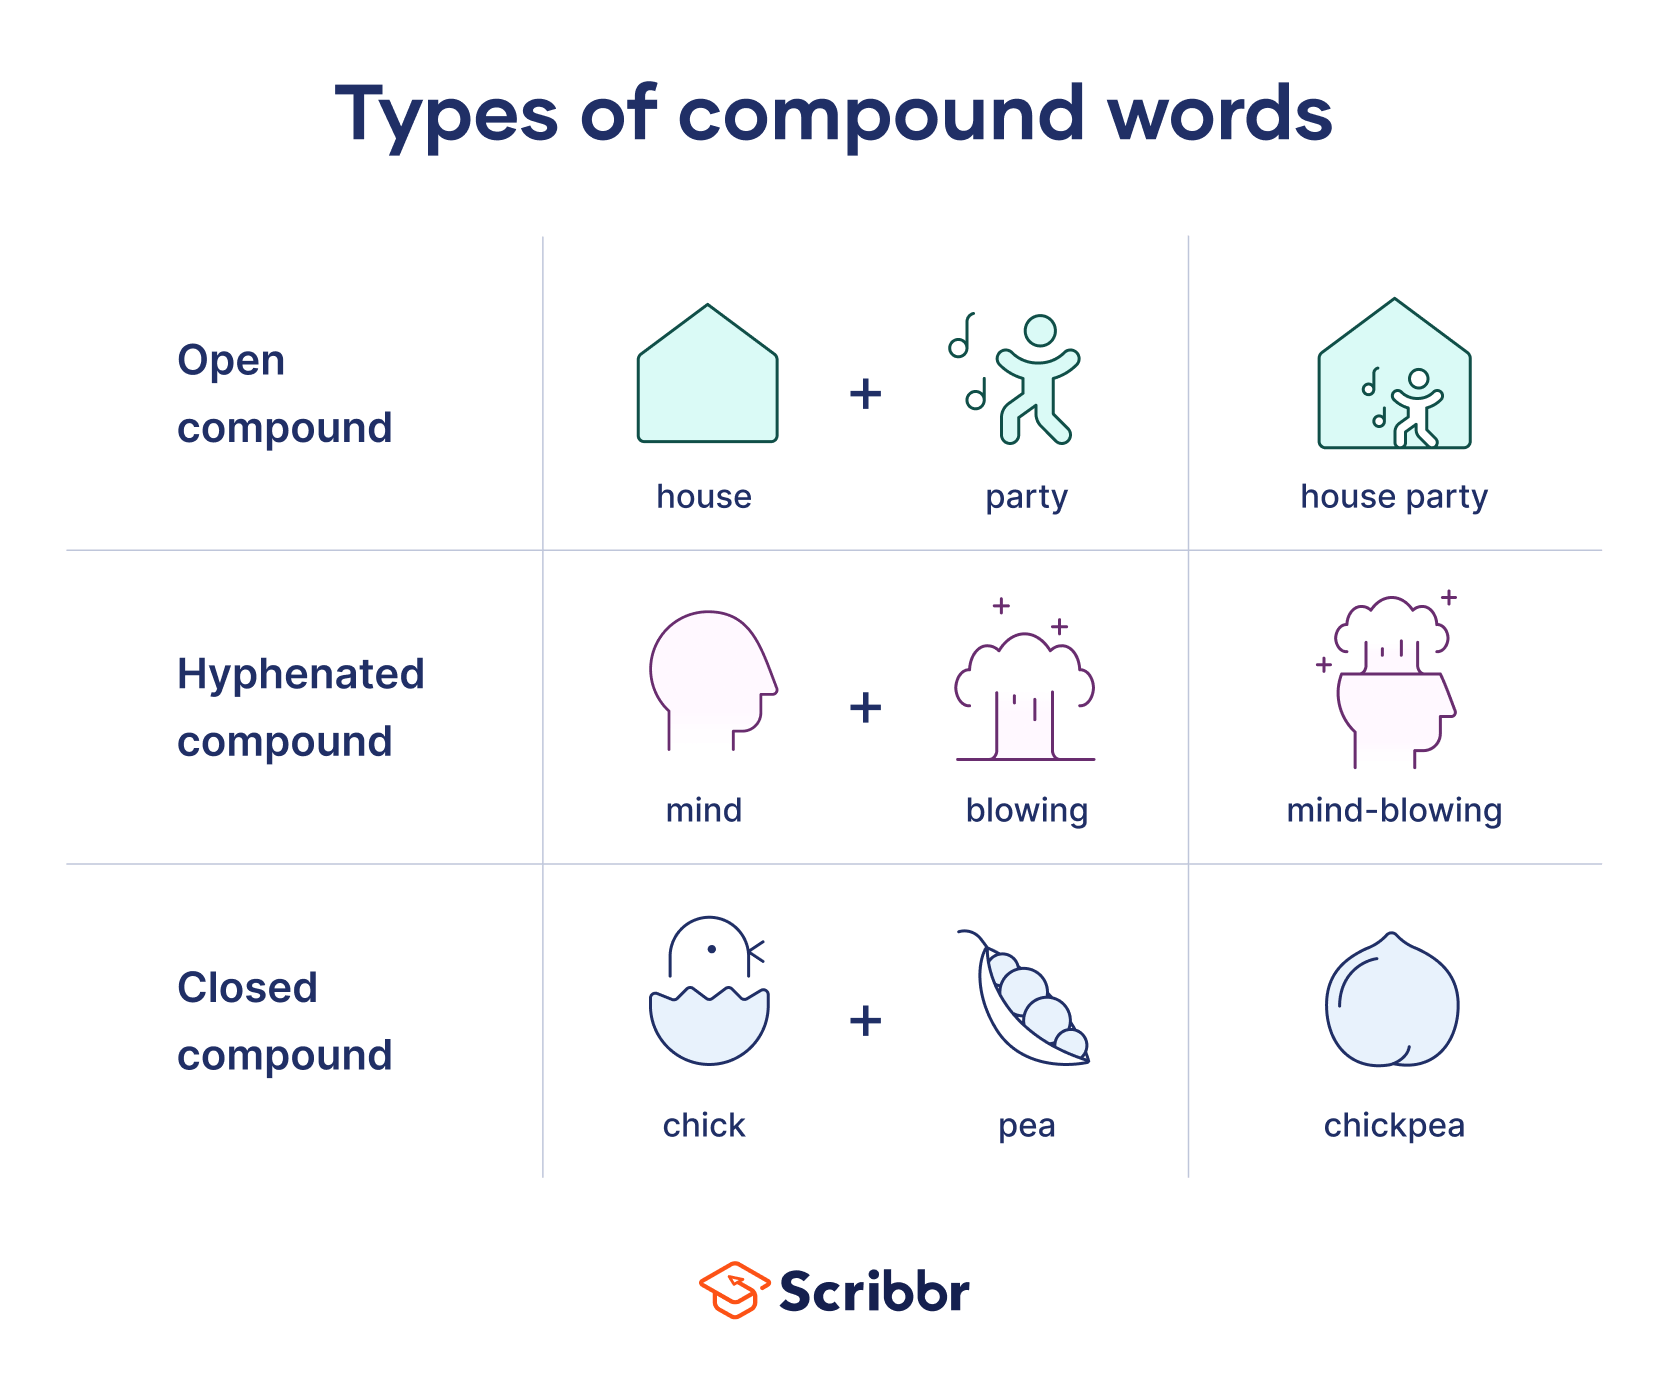 What are the 2 compound words?